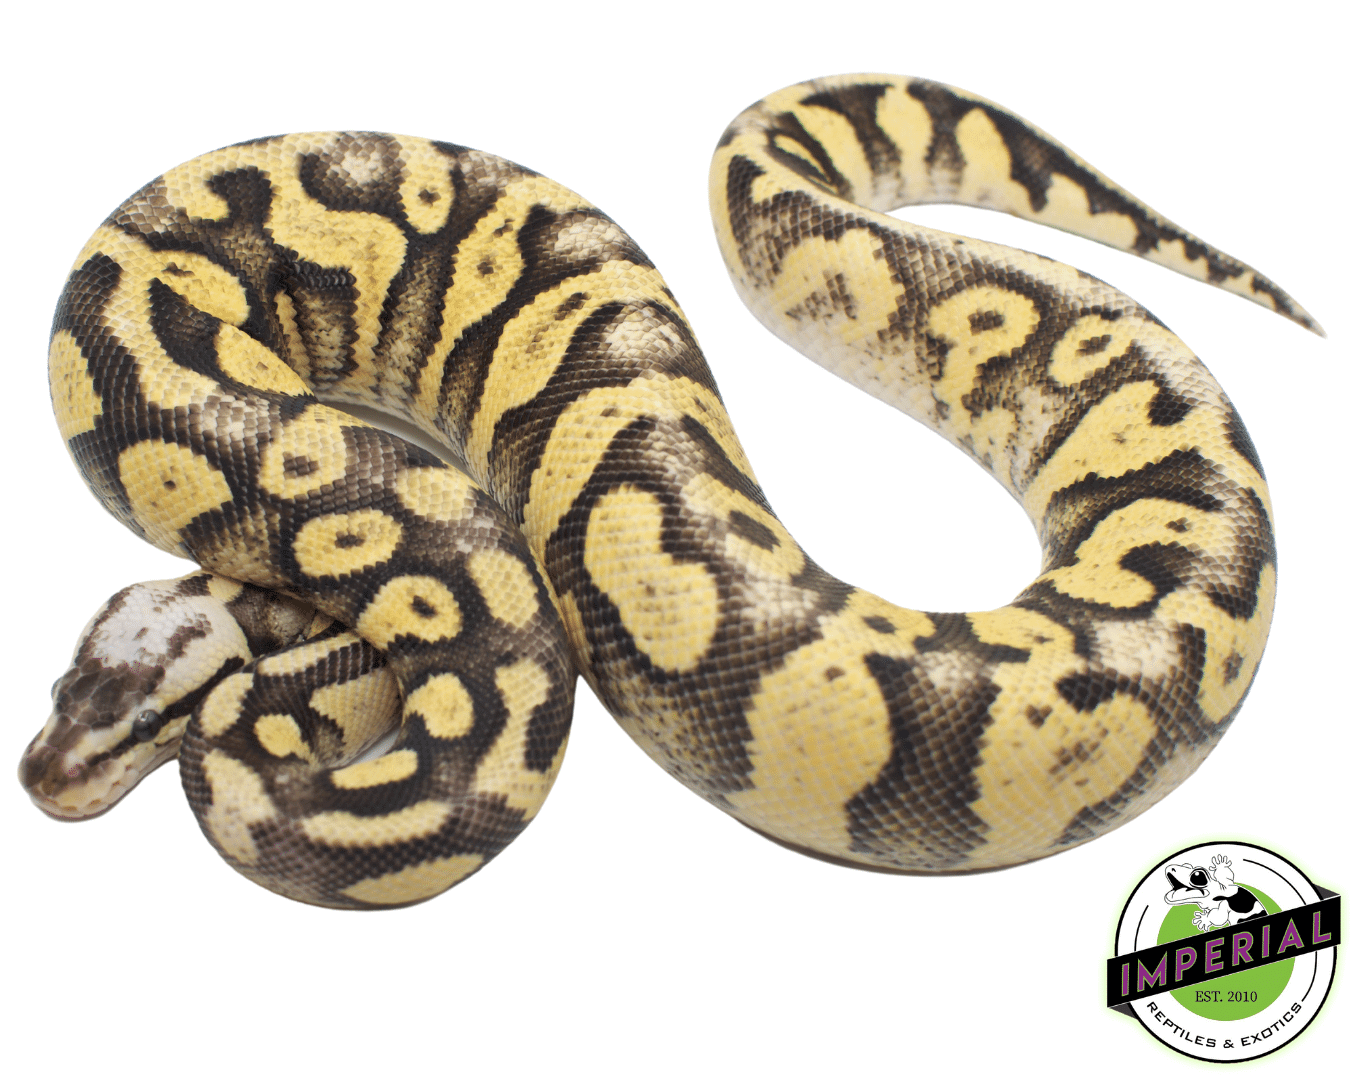 superfly ball python for sale, buy reptiles online at cheap prices